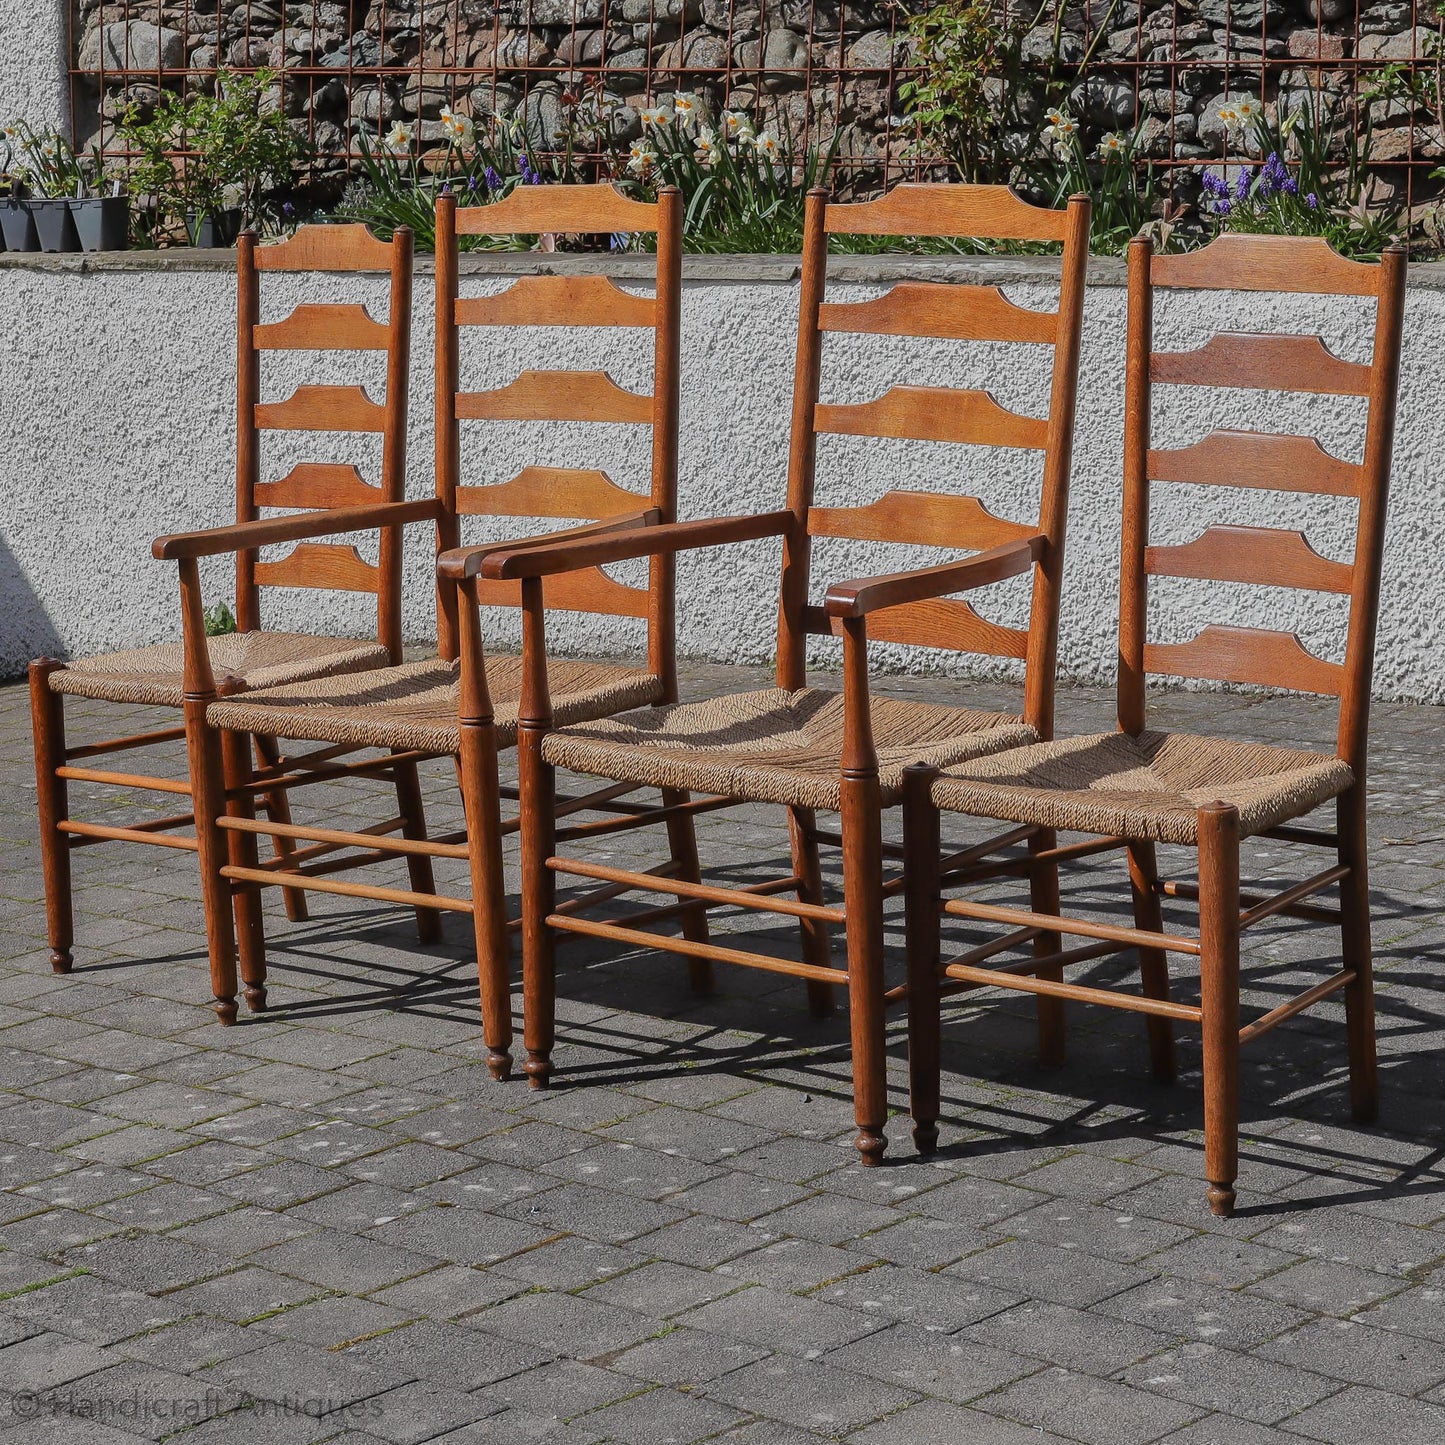 Heal and Co ‘Clissett’ style Arts & Crafts Cotswold School Oak Chairs.